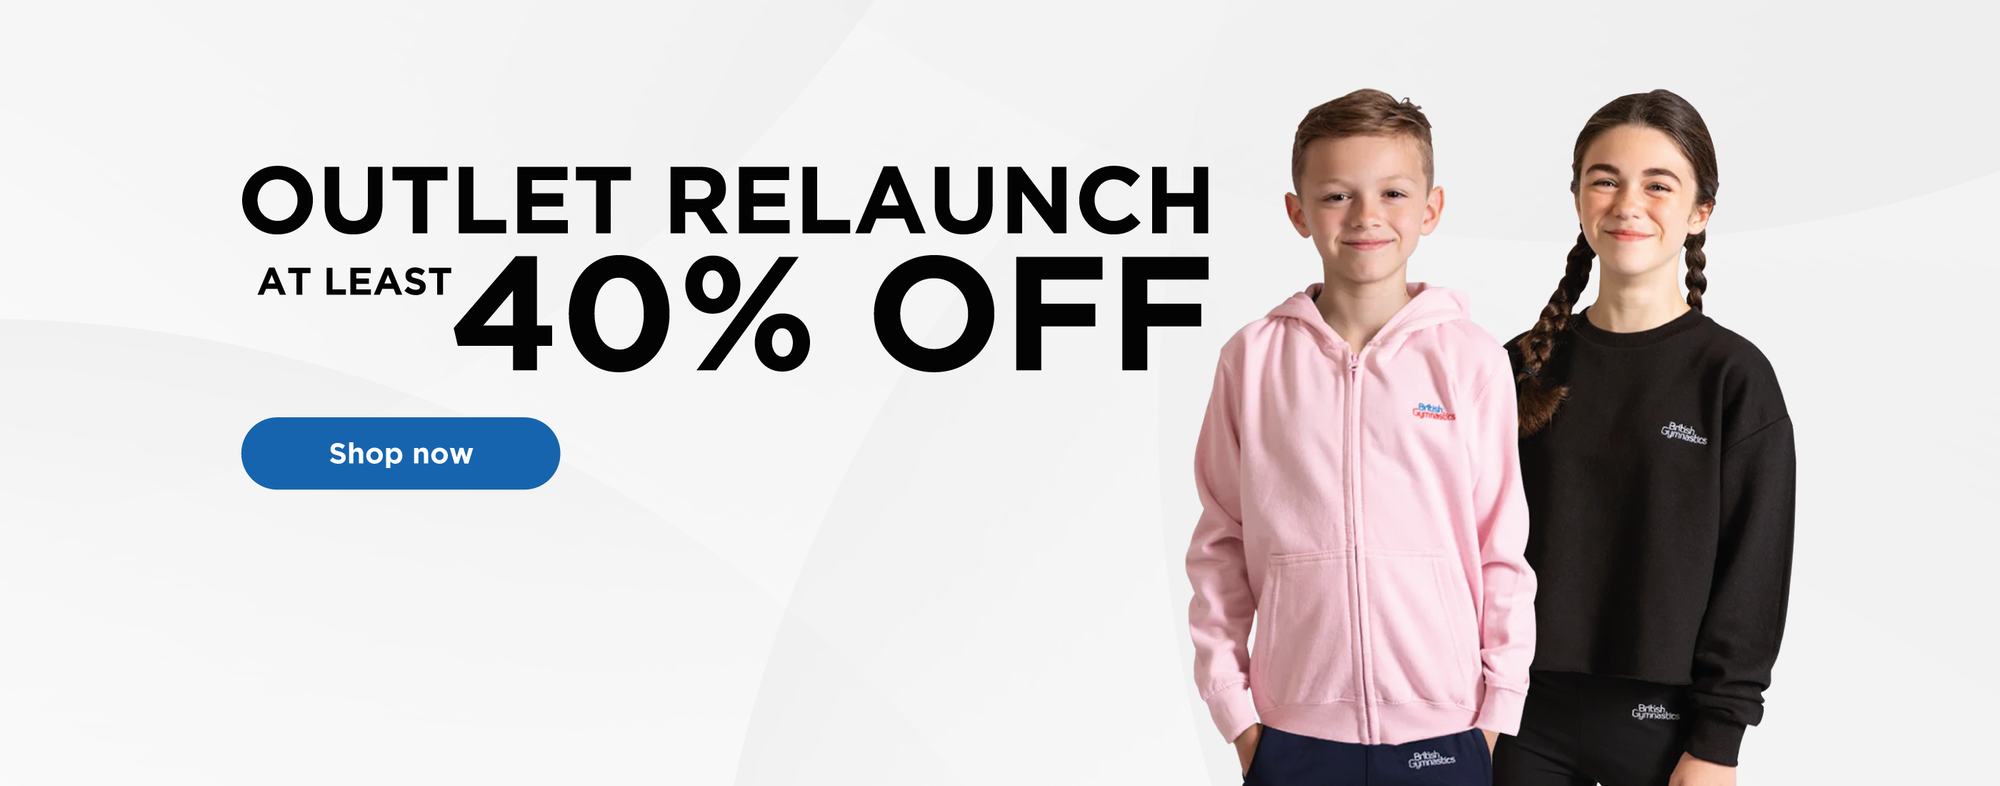 British Gymnastics Store Outlet Relaunch